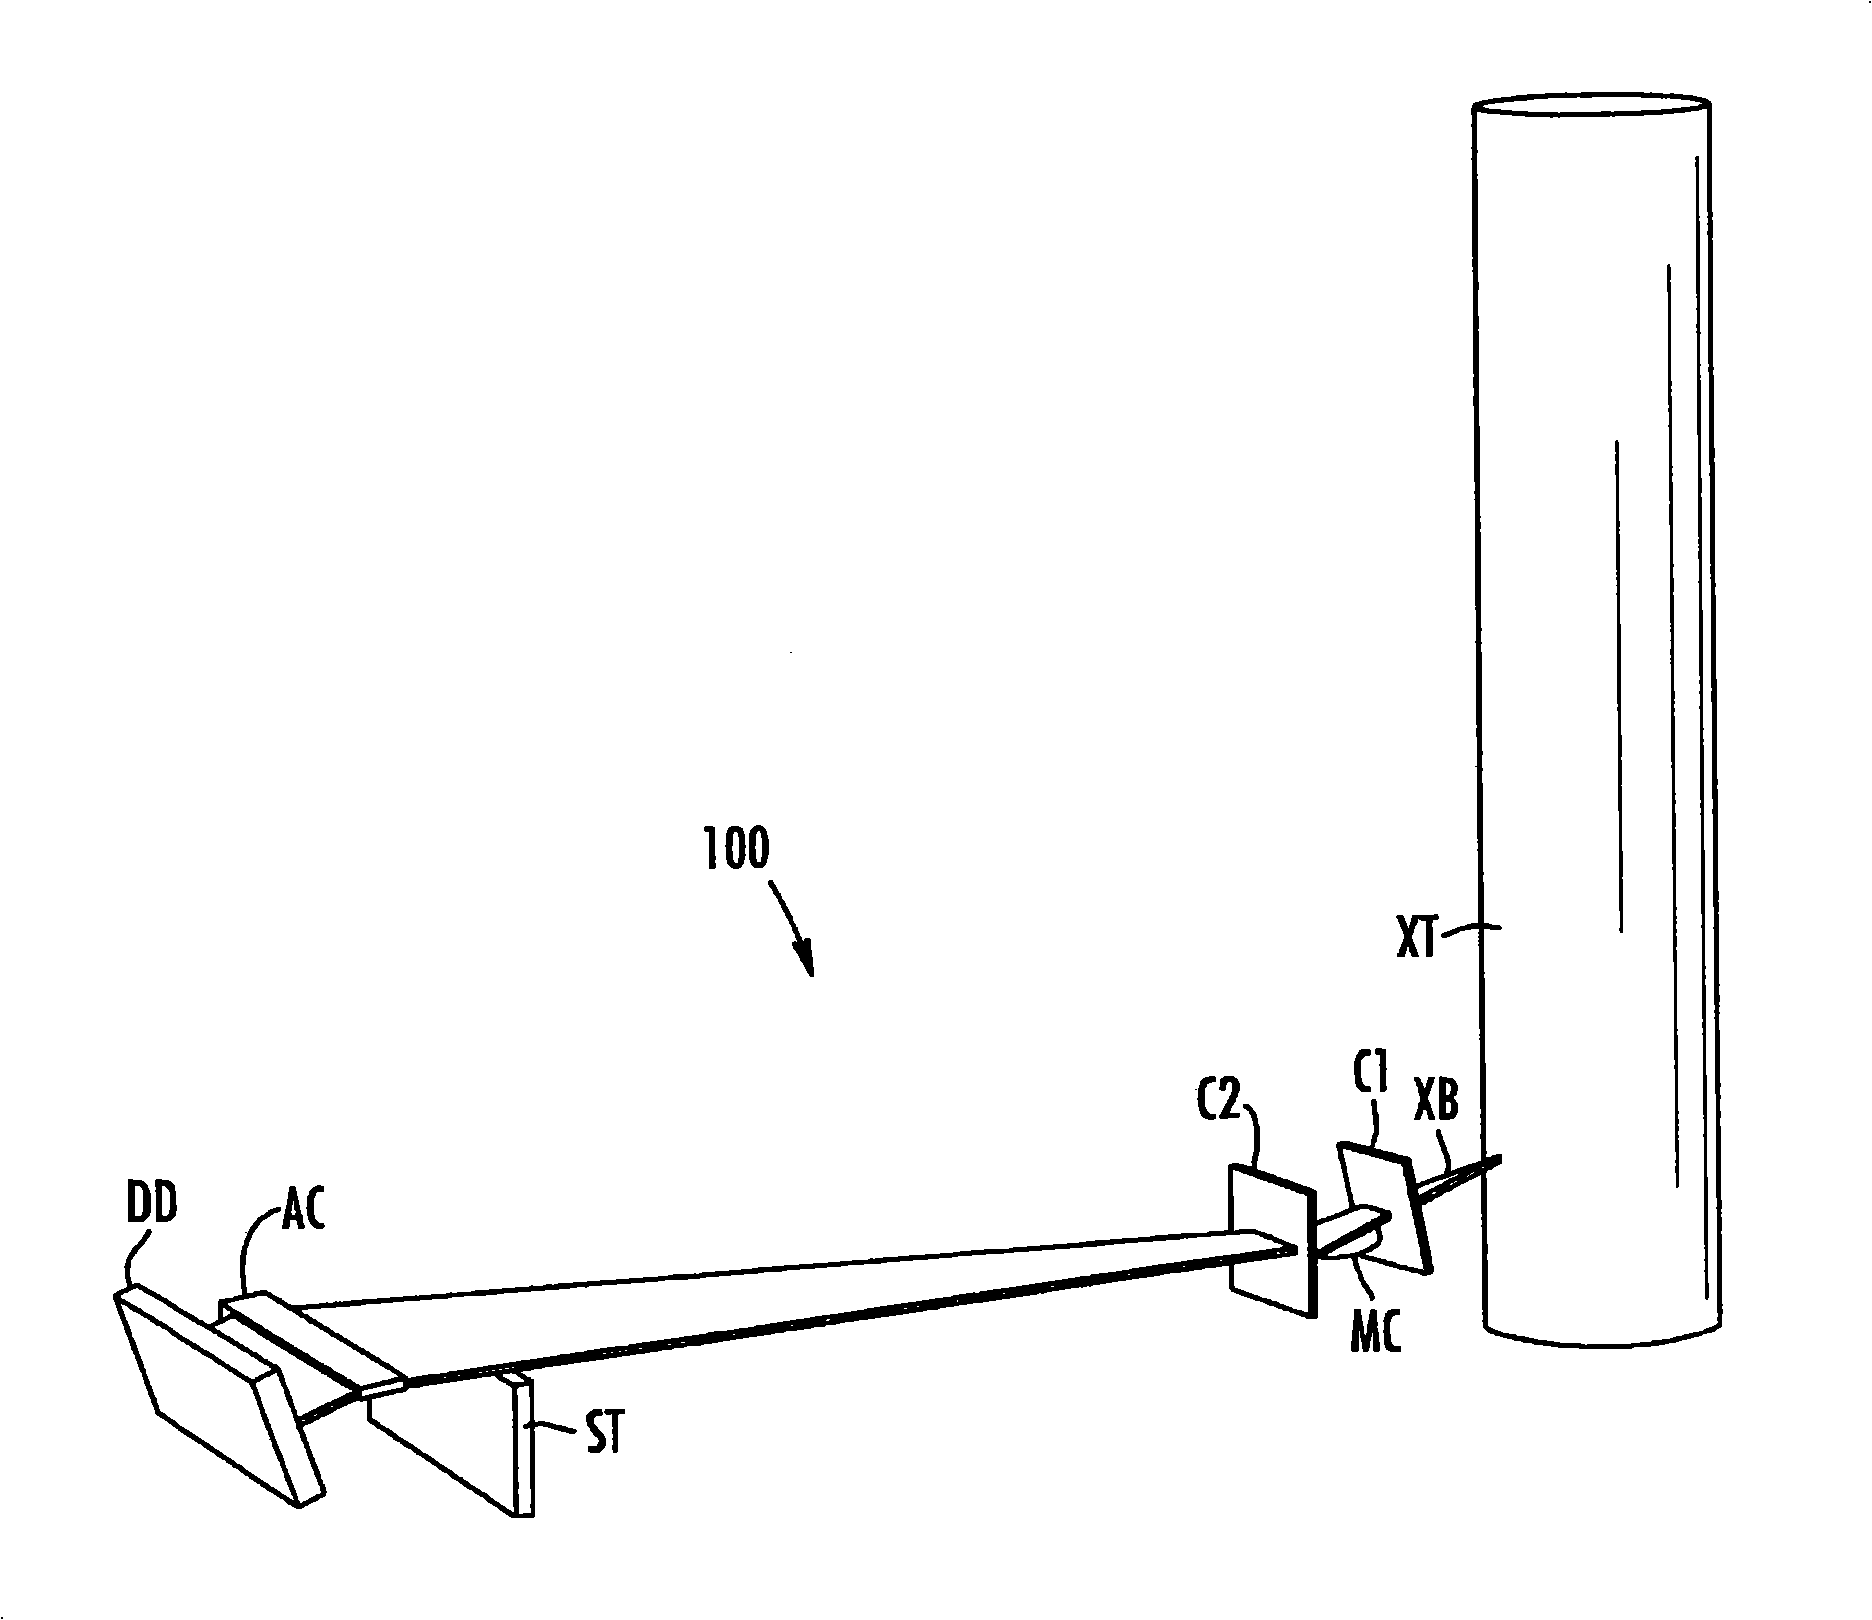 Systems and methods for detecting an image of an object by use of an x-ray beam having a polychromatic distribution